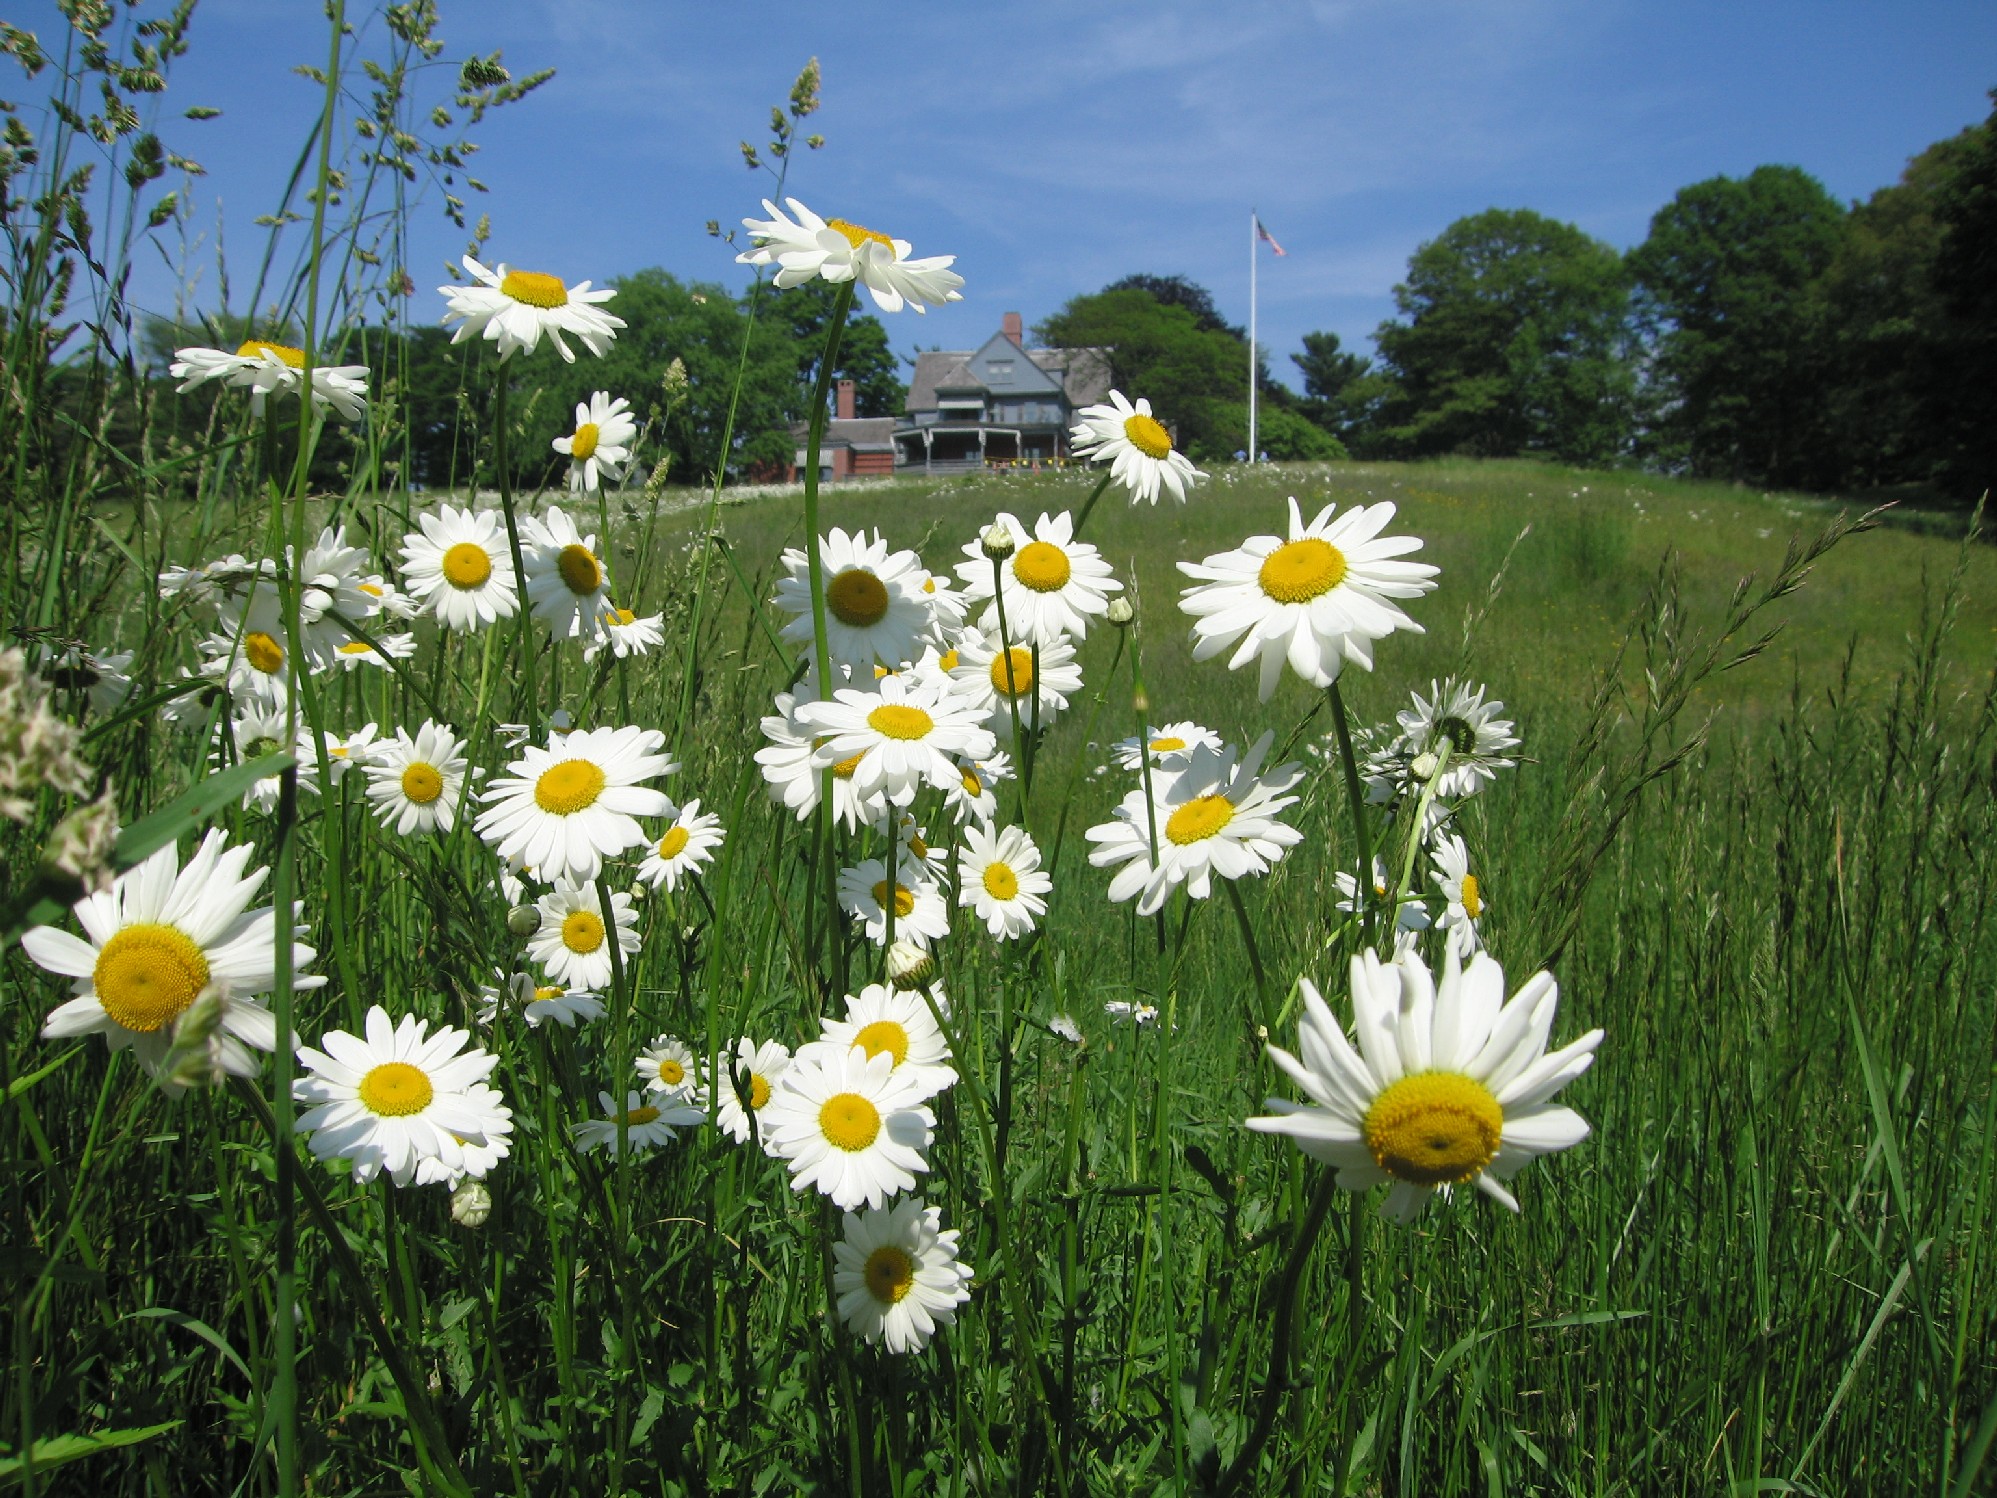 Daisies in front of Sagamore Hill